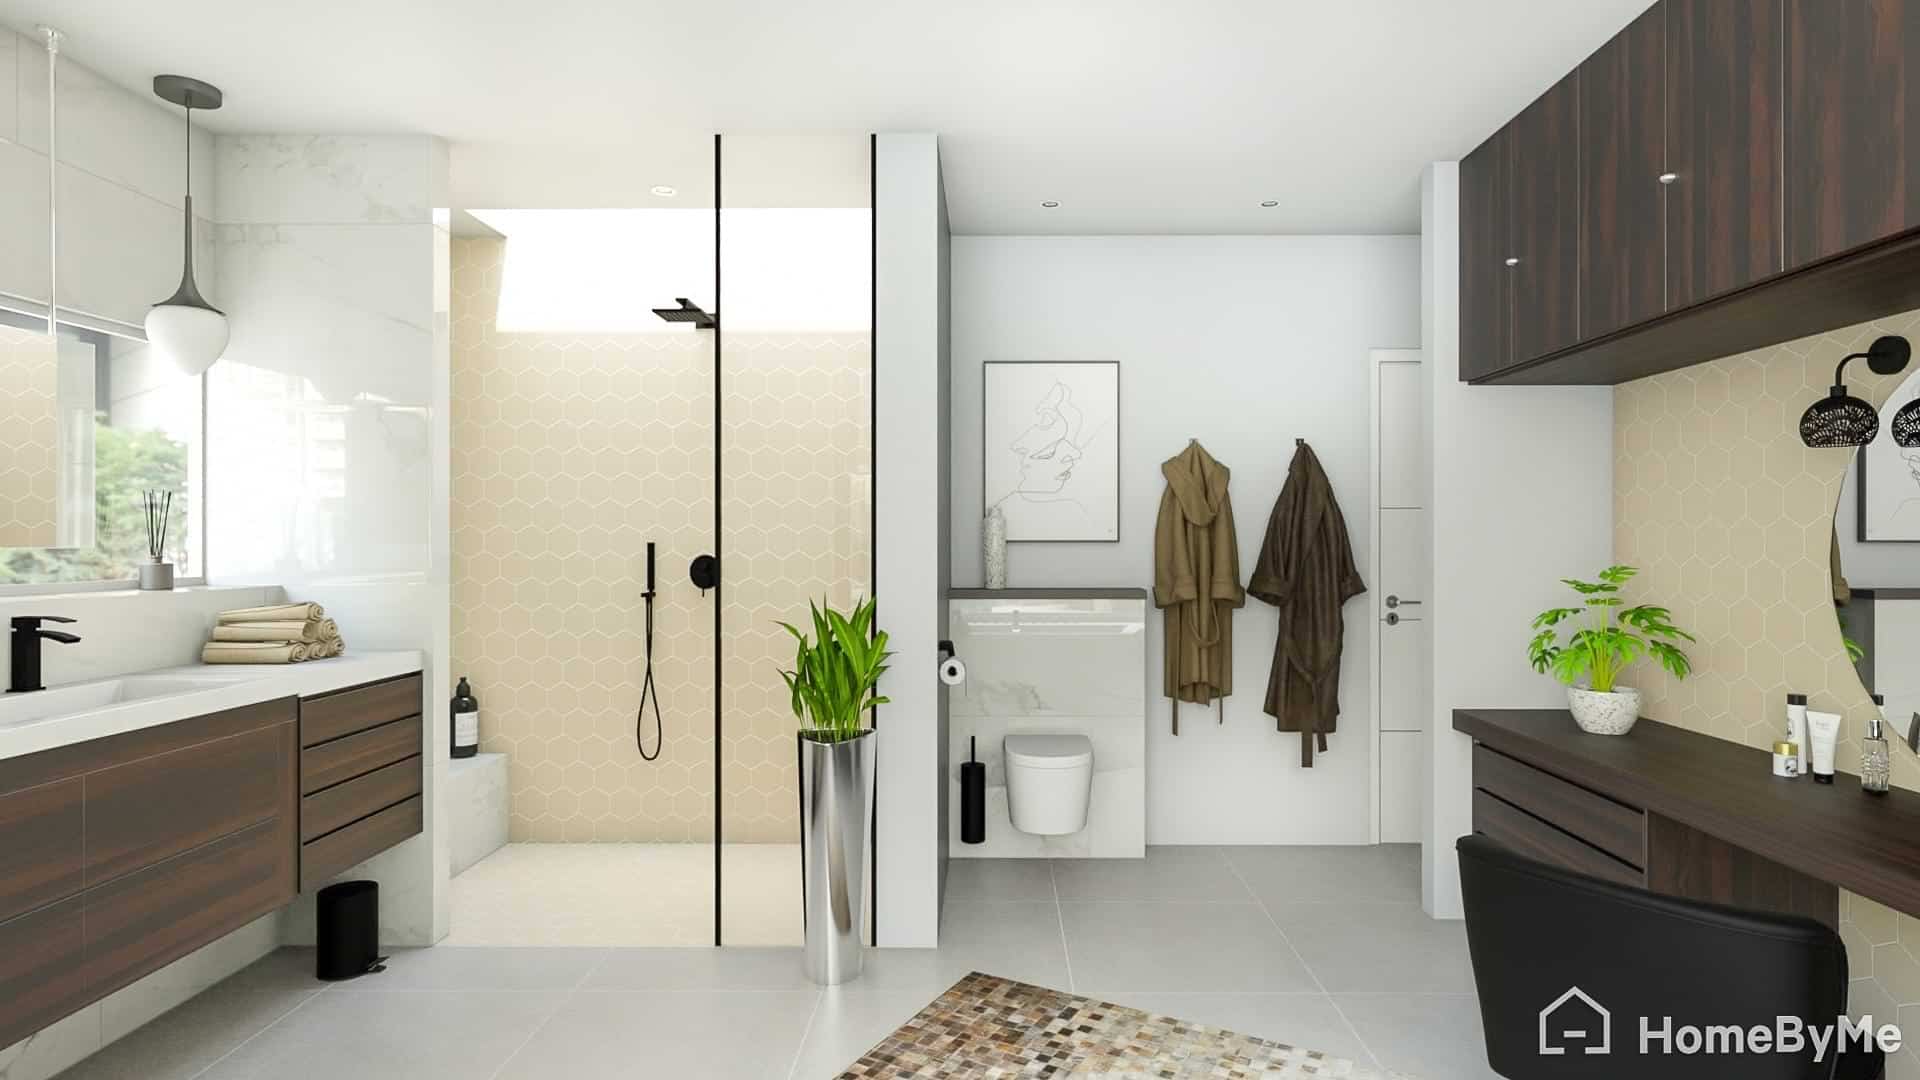 homebyme home bathroom design interior layout in white colour